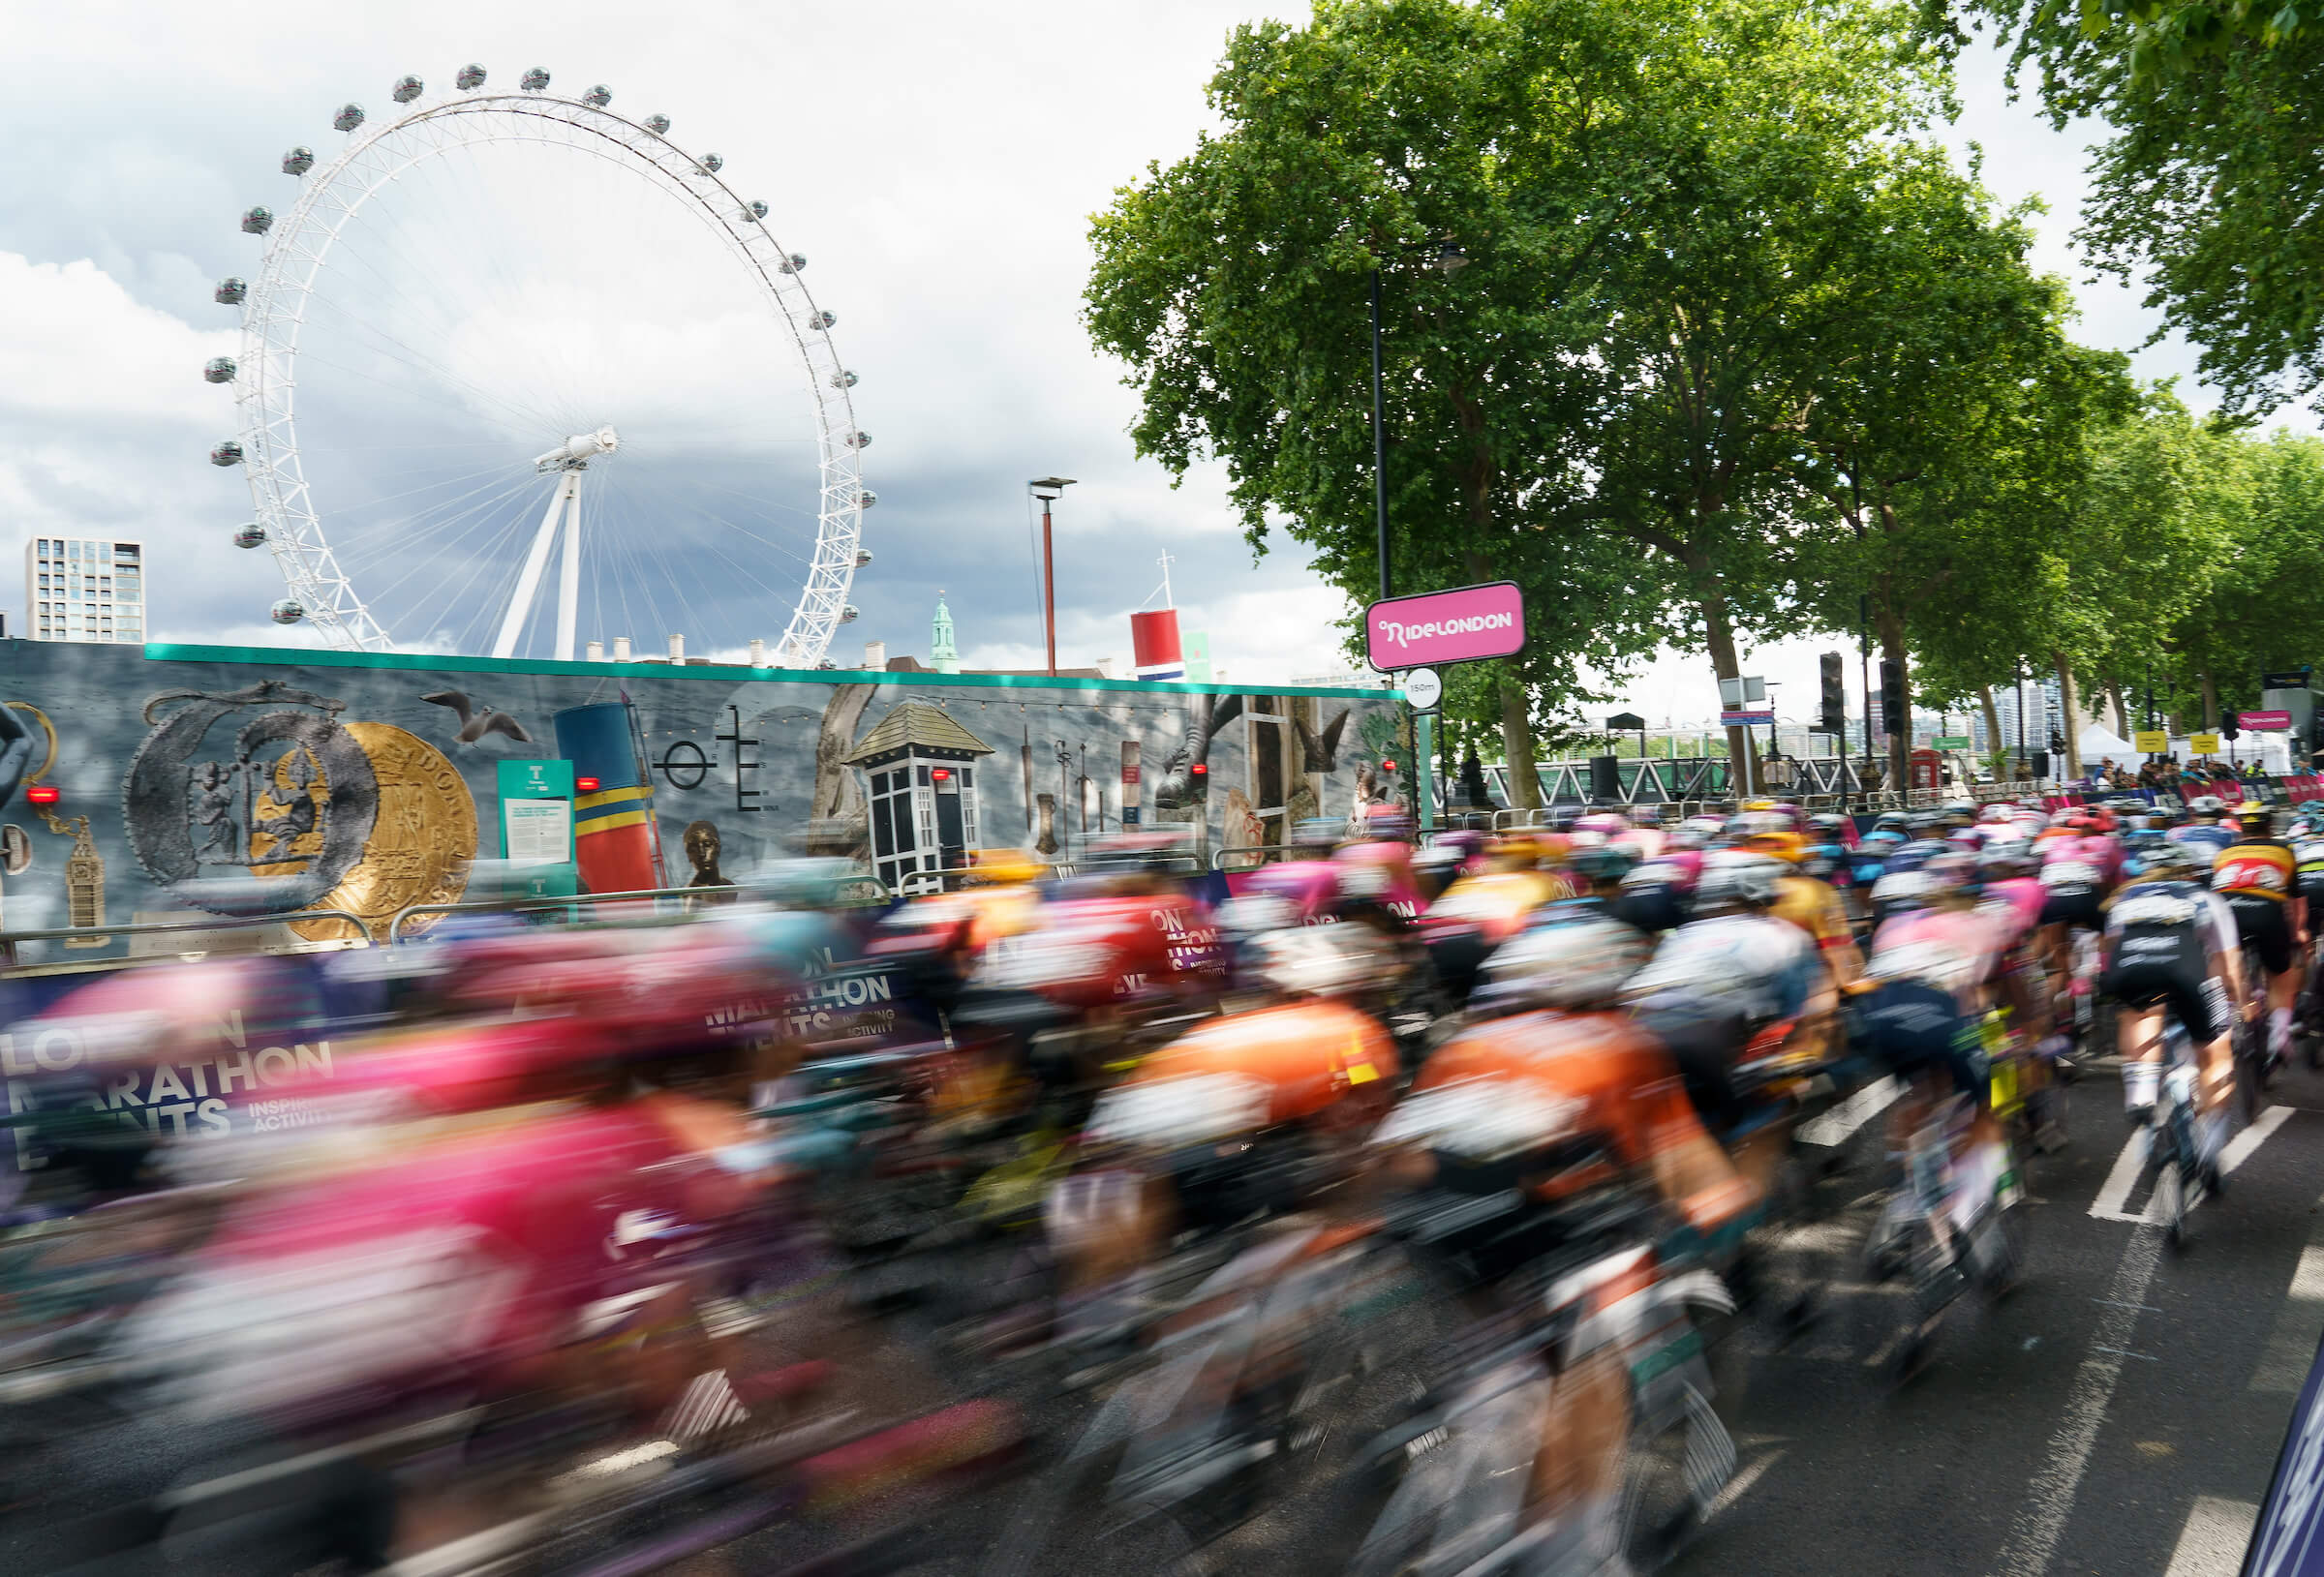 A blur of cyclists moving in central London